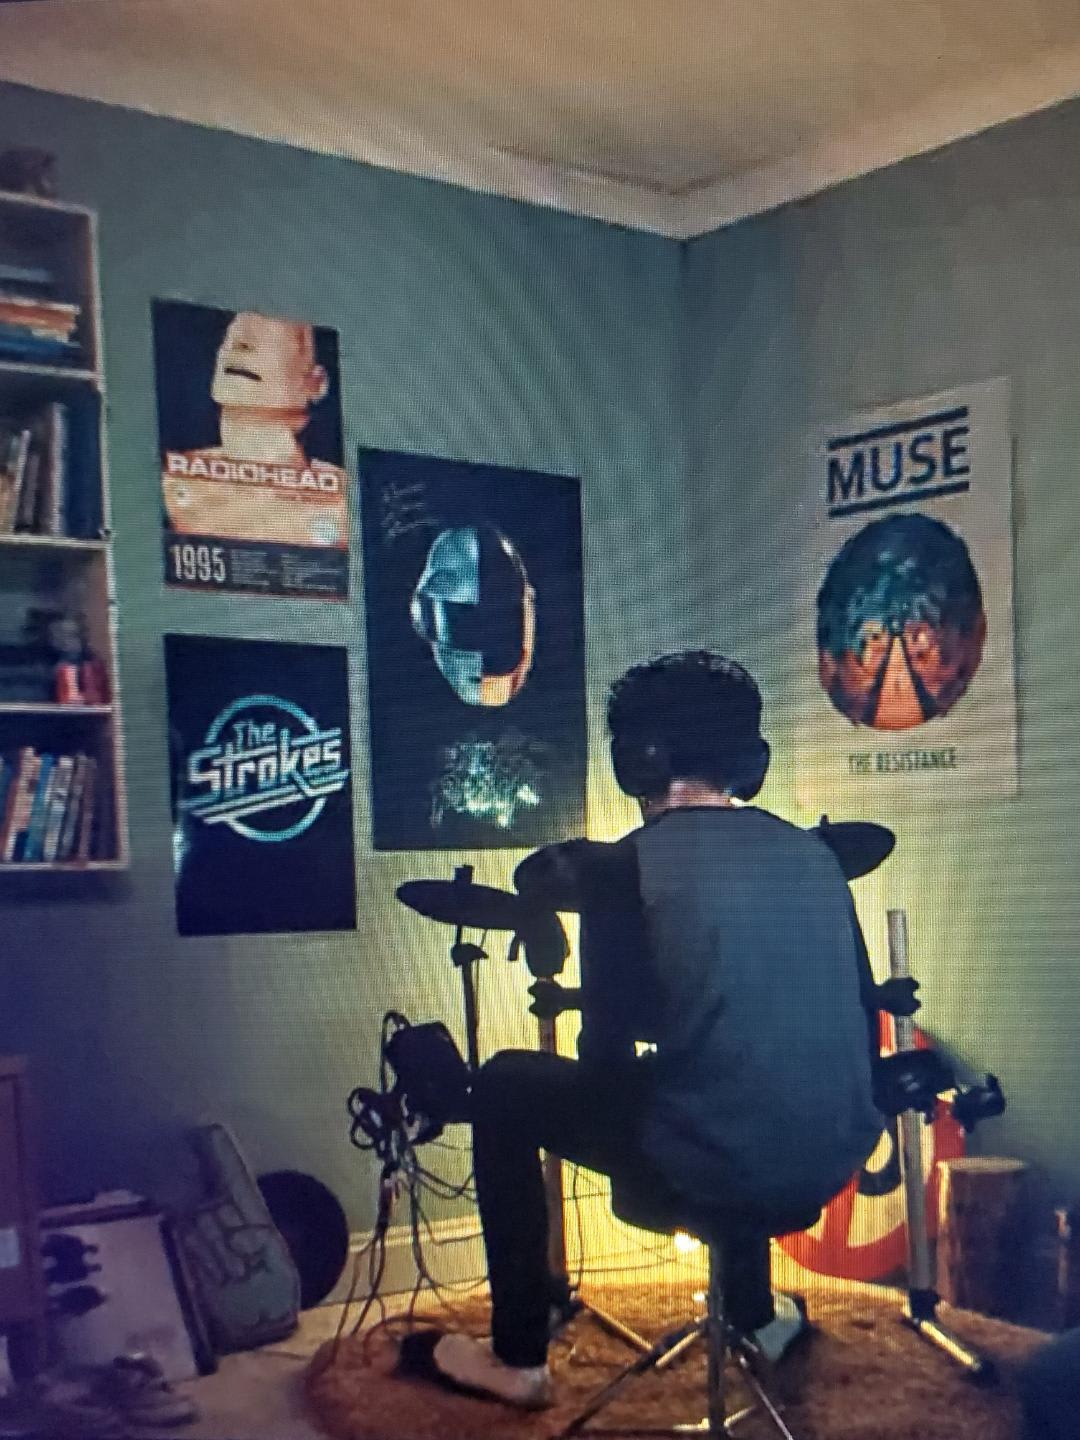 The Strokes poster seen in Heartstopper :p (the new Netflix series)